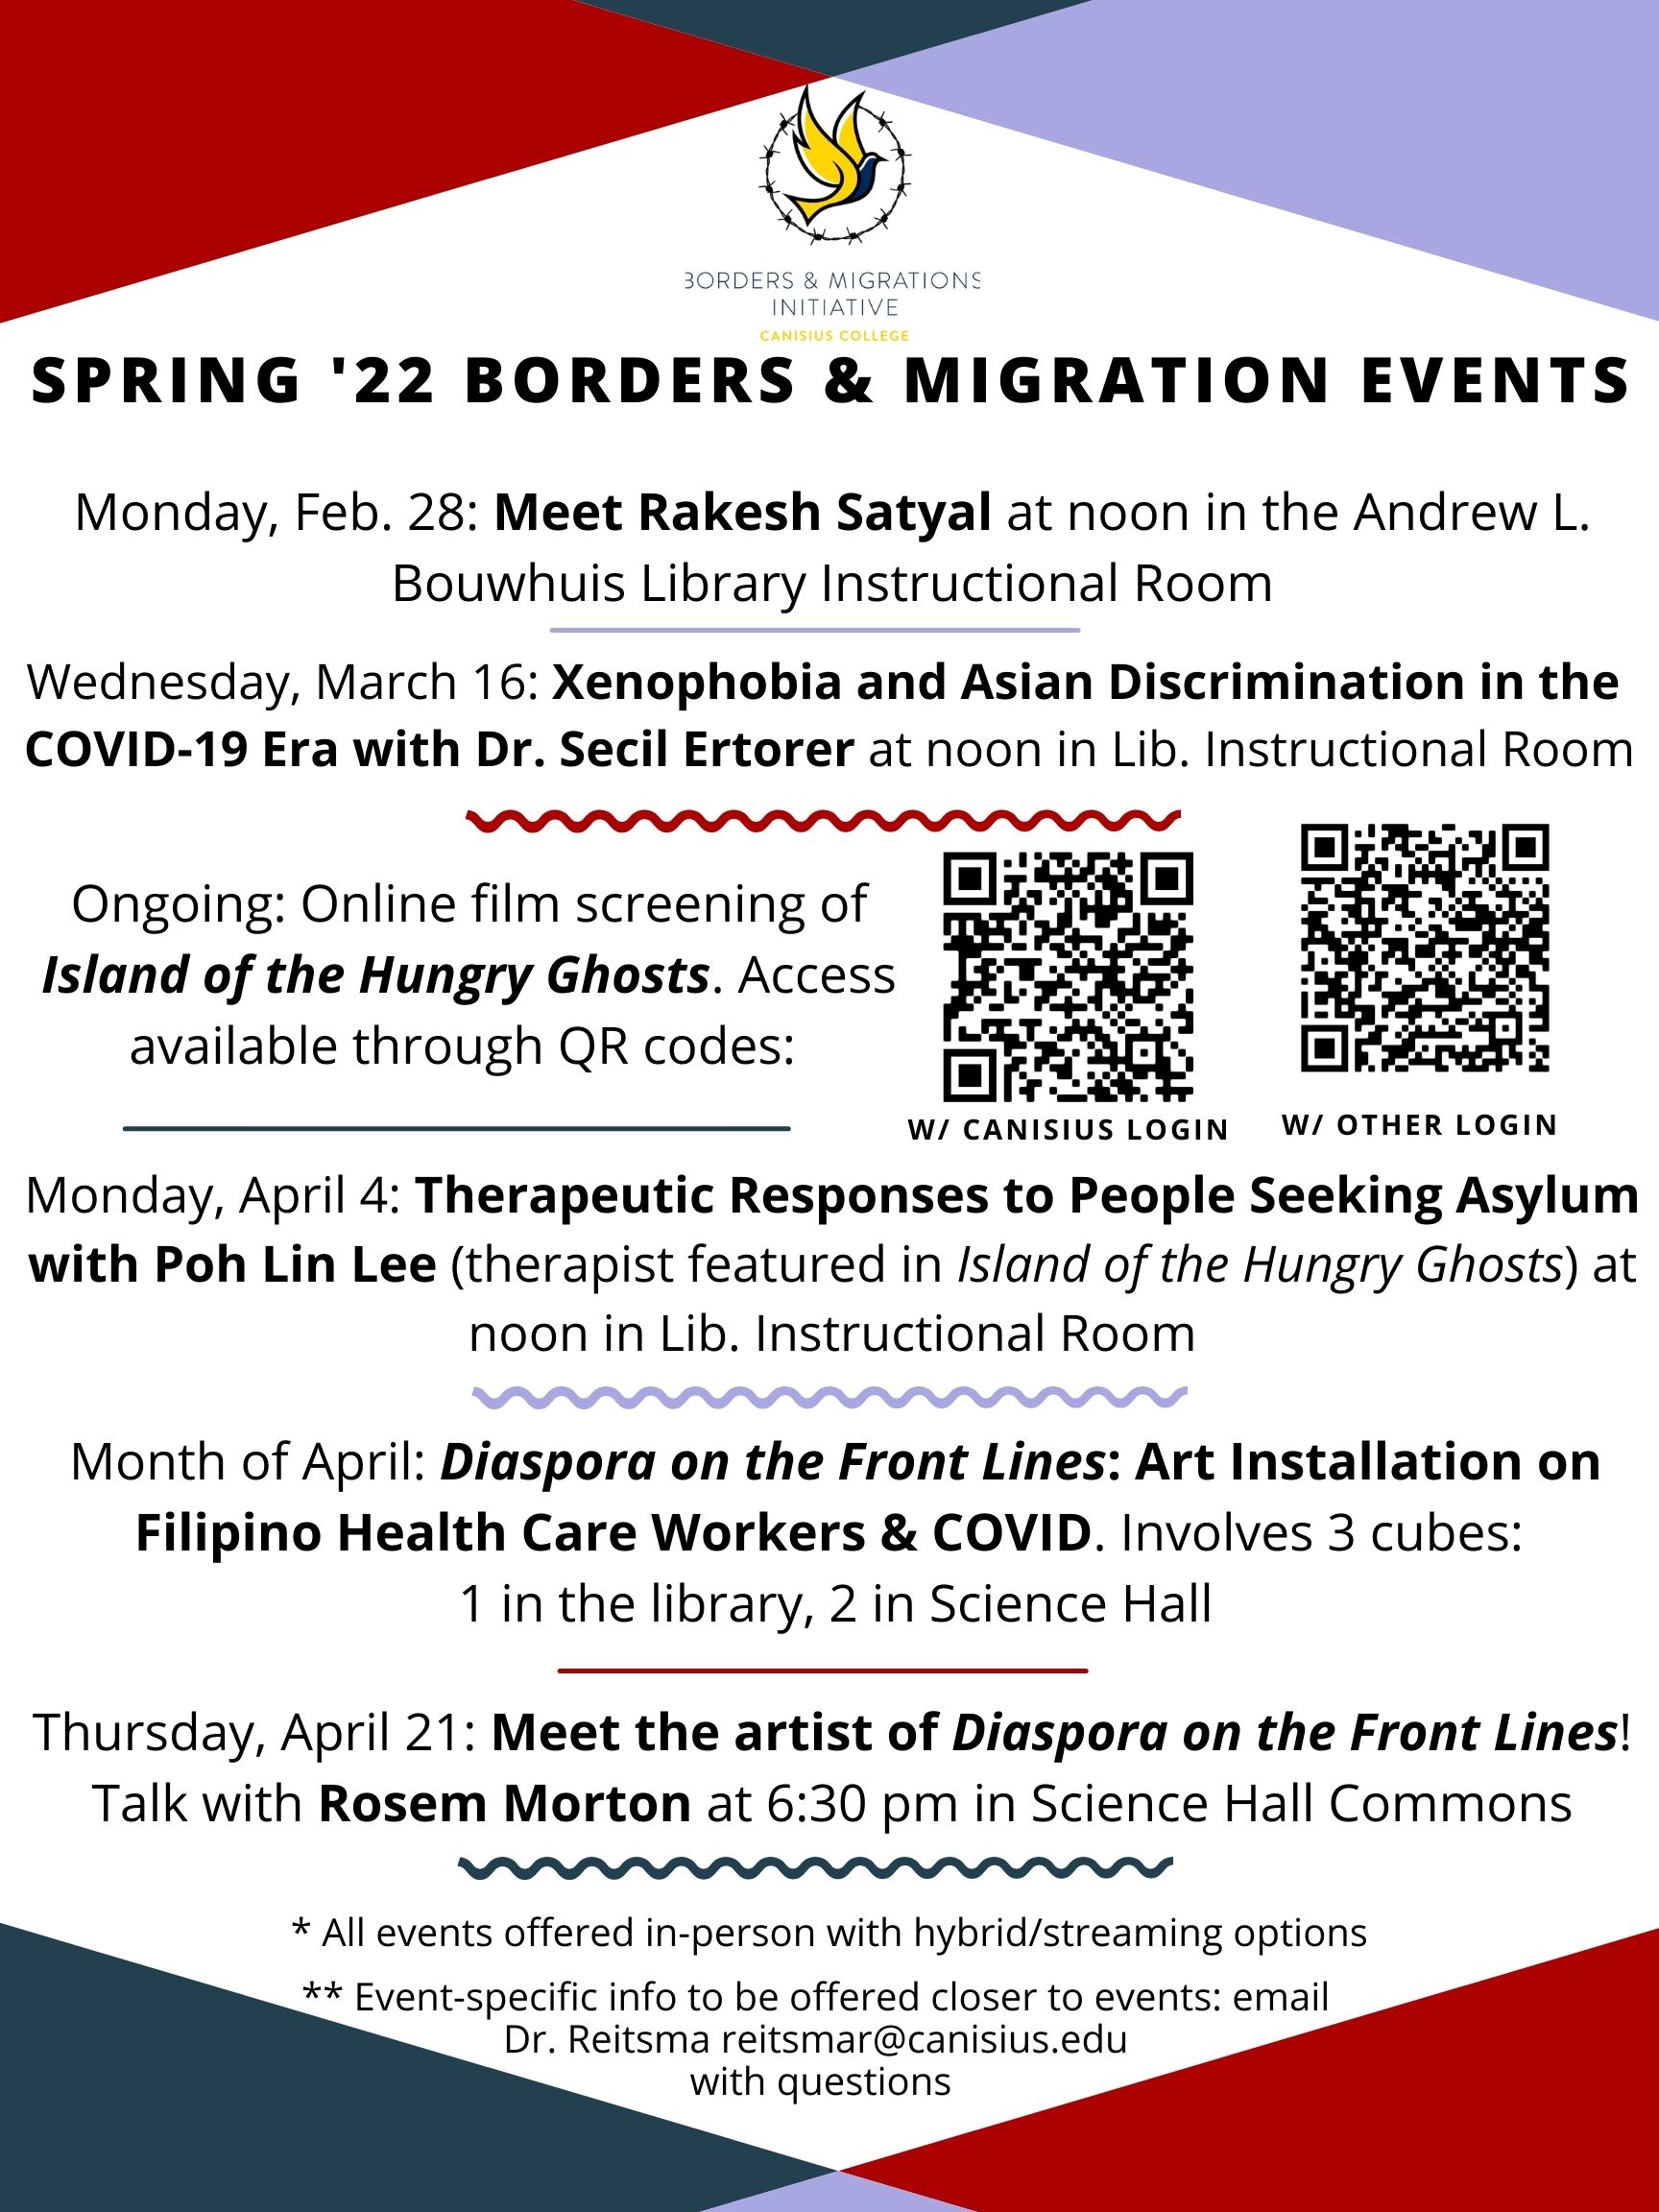 Borders & Migrations Initiative Presents Spring 2022 Series | The Dome